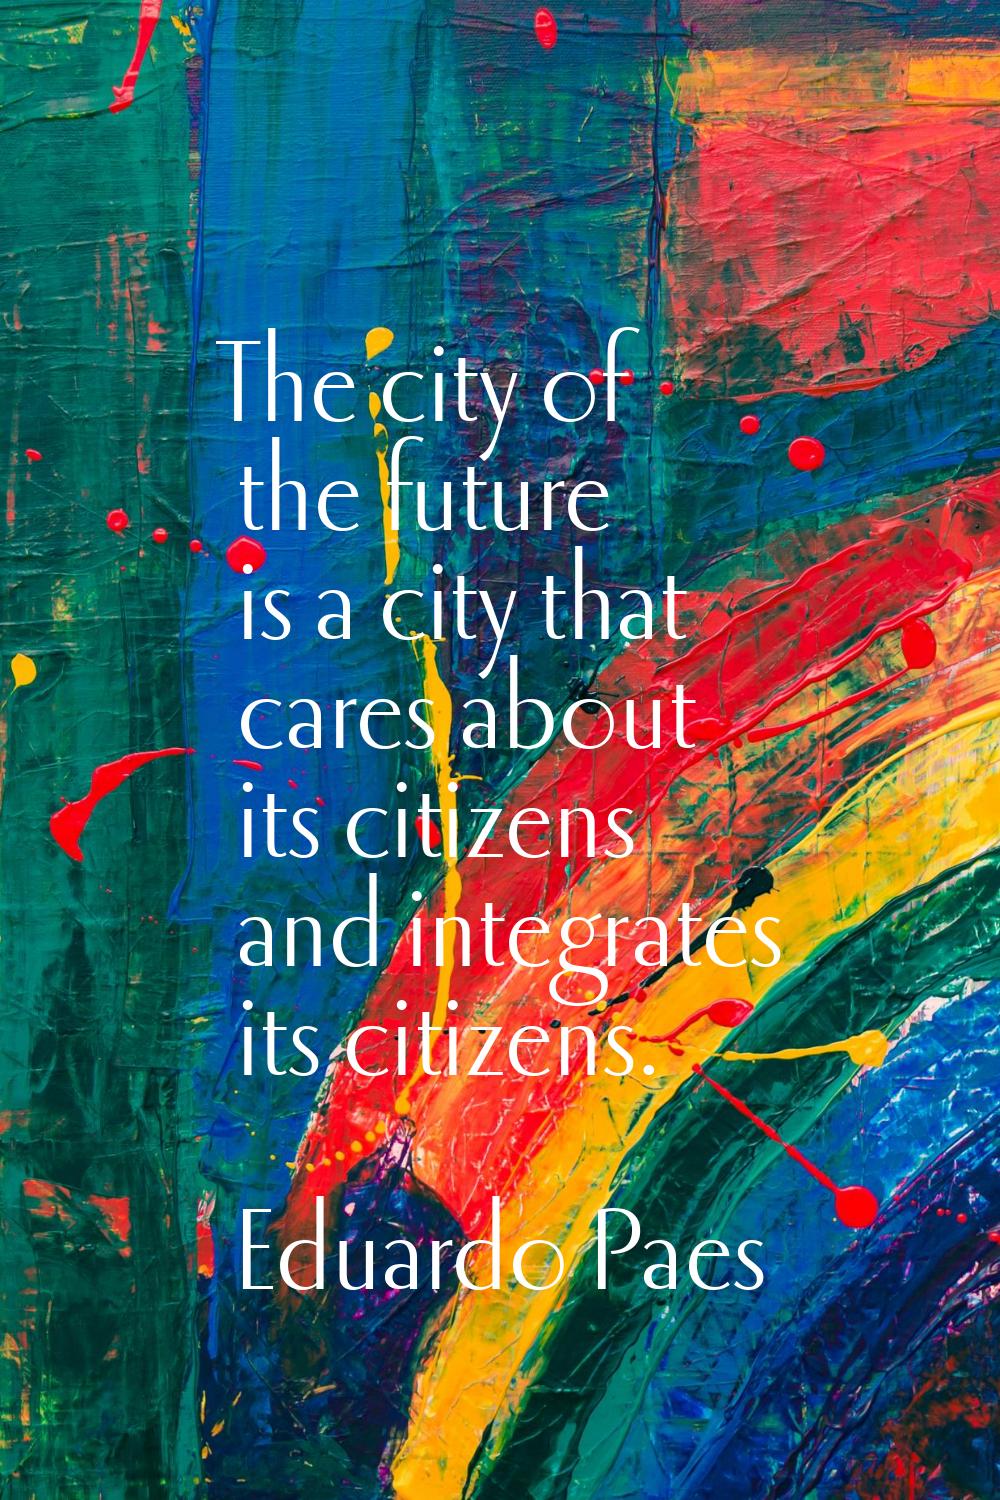 The city of the future is a city that cares about its citizens and integrates its citizens.